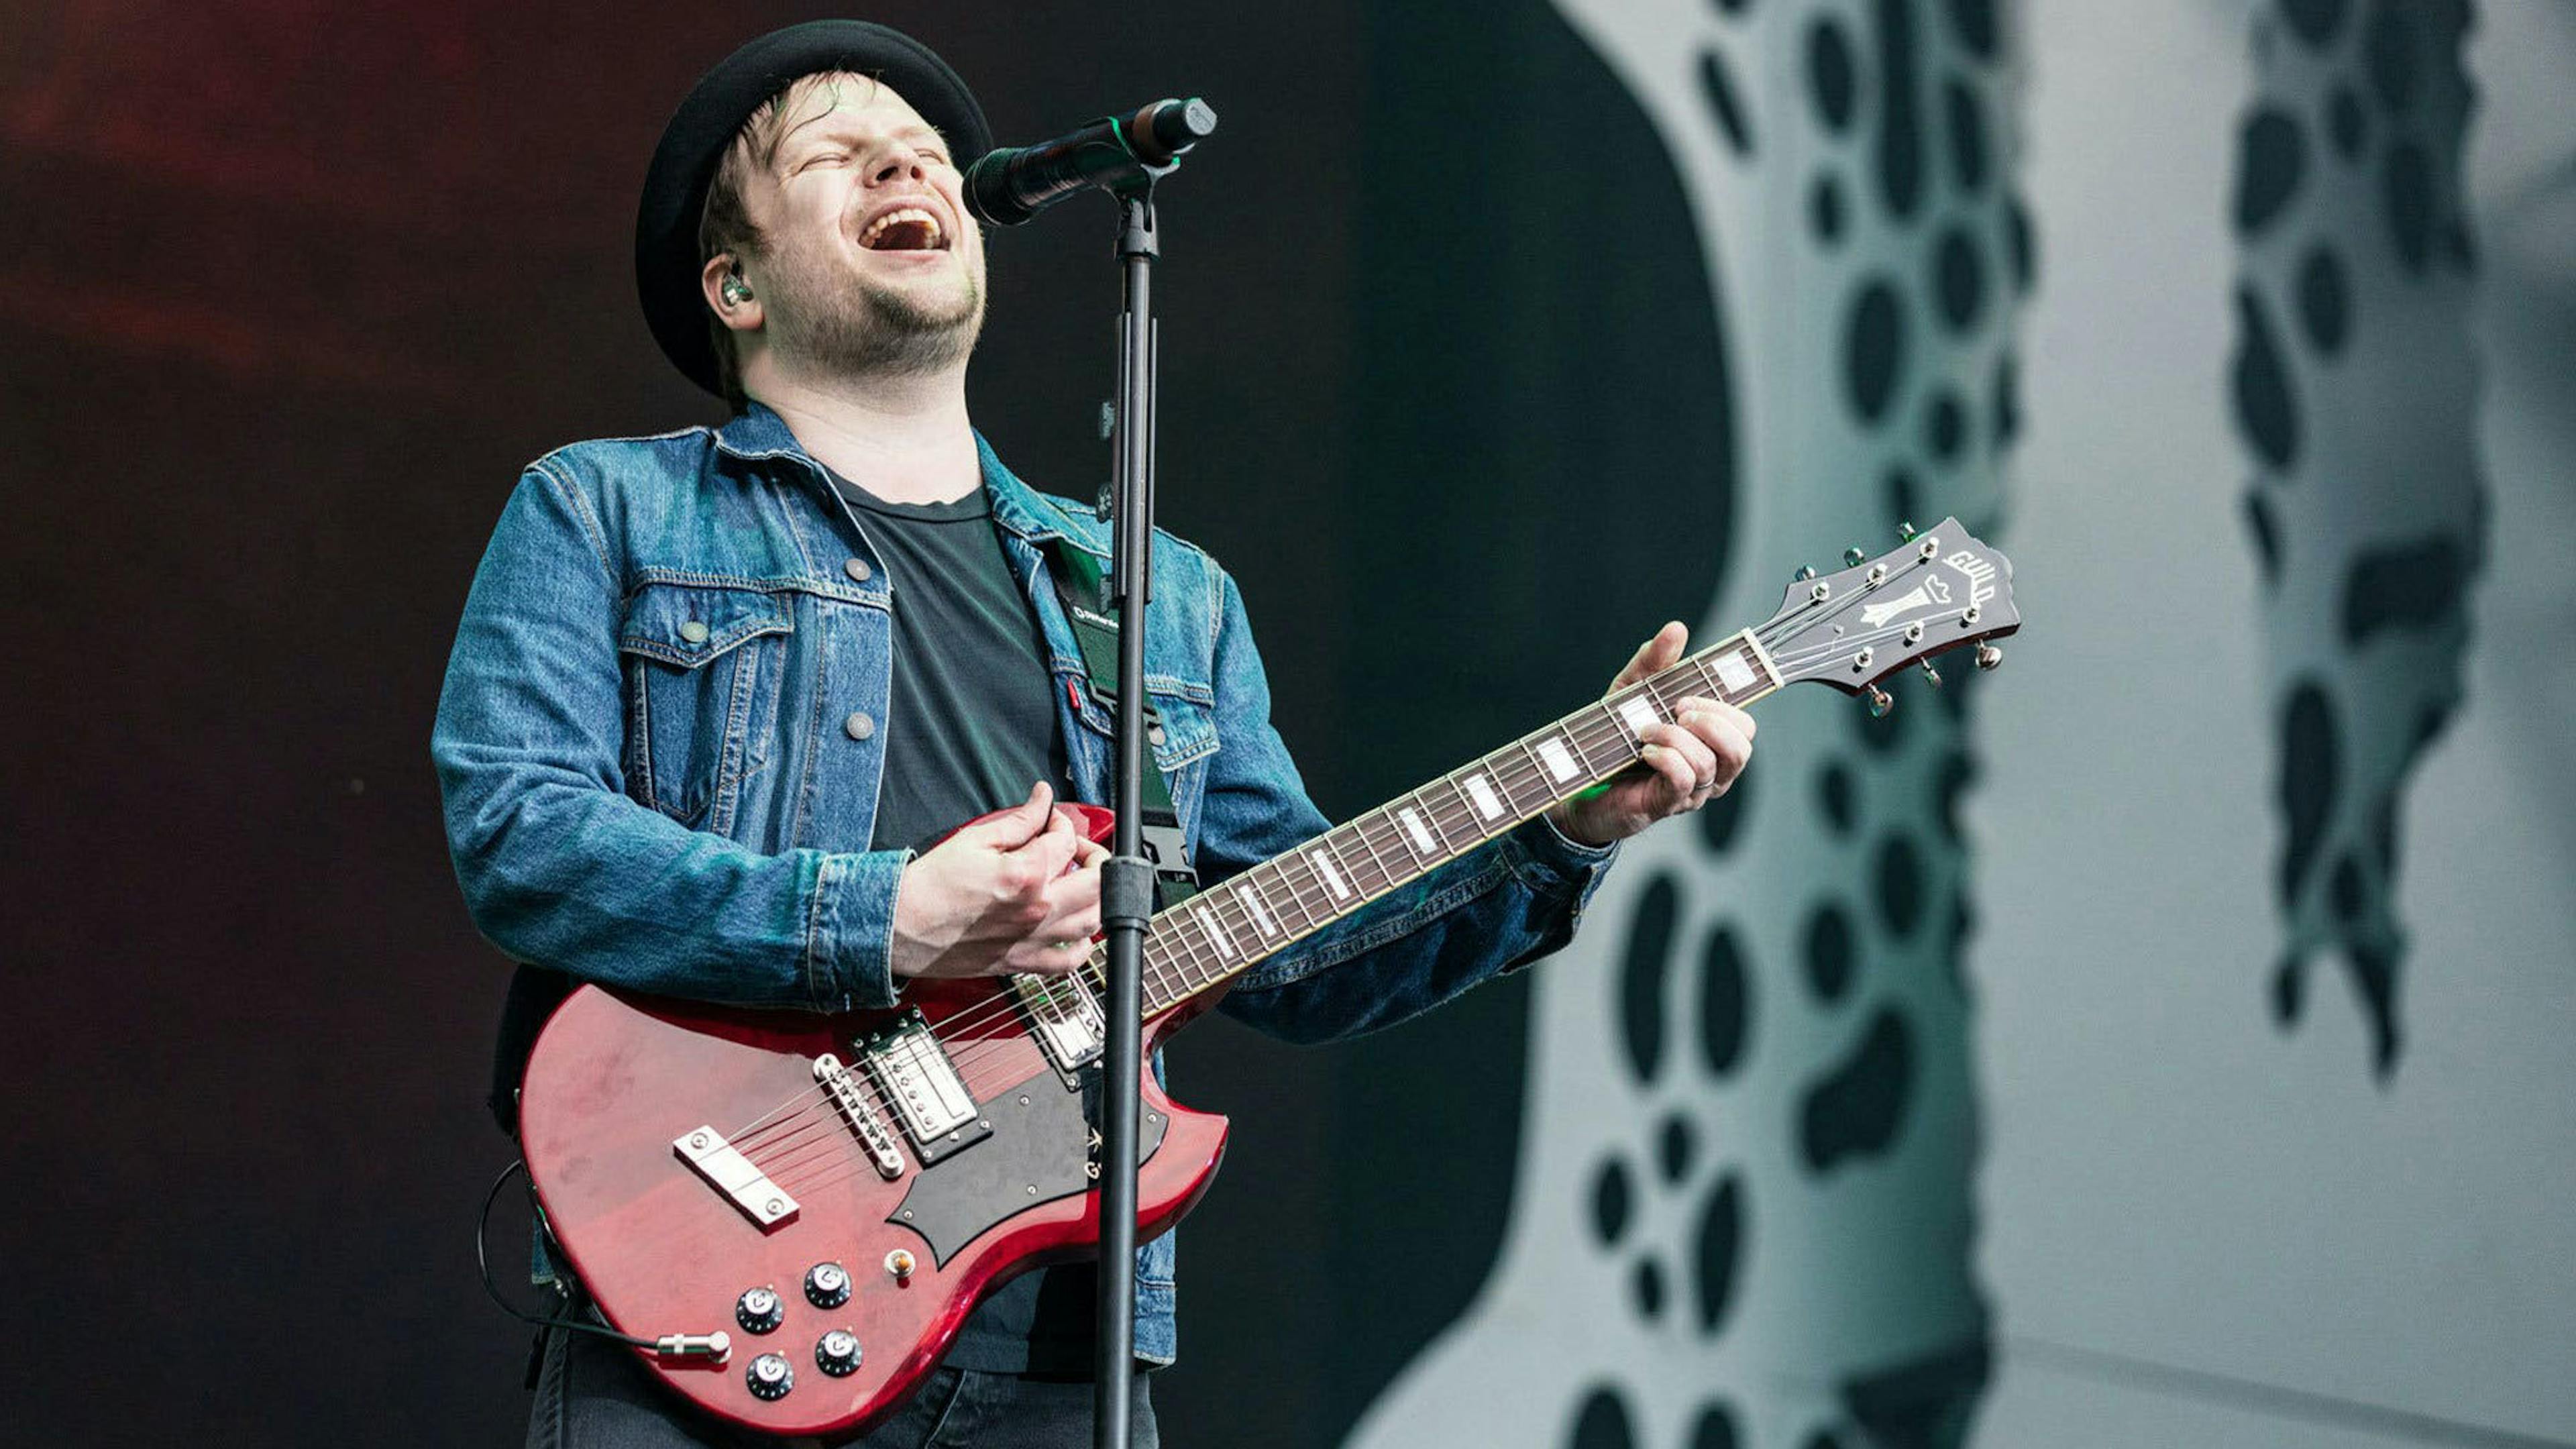 Videos: Fall Out Boy: Sugar, We're Going Down (featuring Hayley Williams)